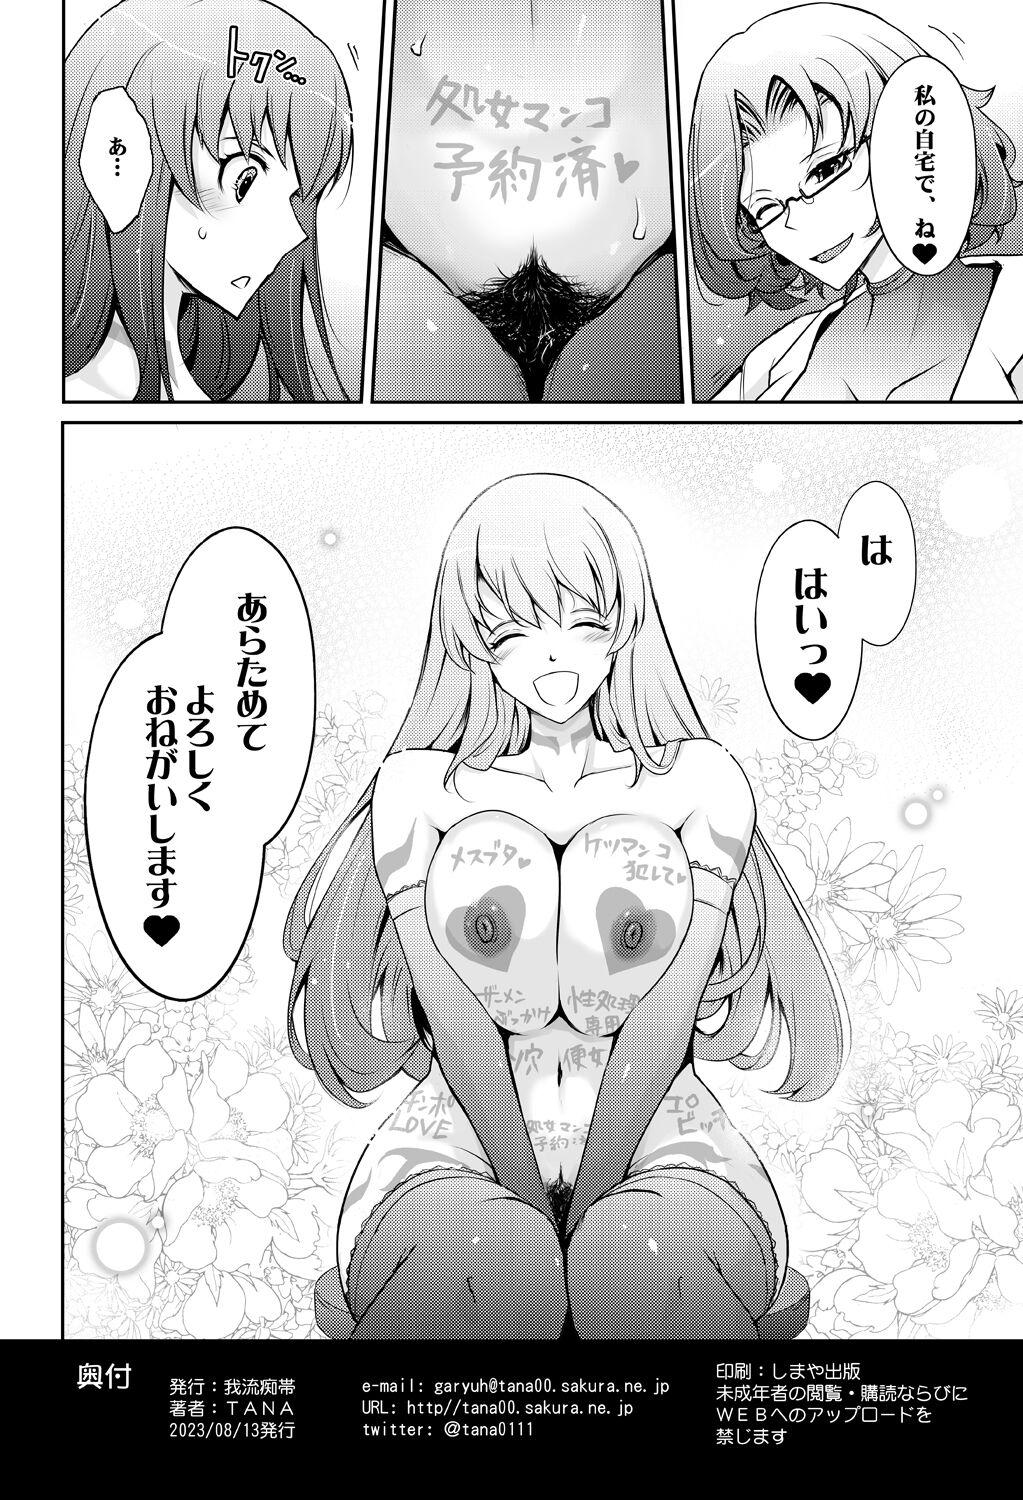 Spying 淫猥性癖全肯定クリニック 肛穴口淫科 - Original Transexual - Page 42